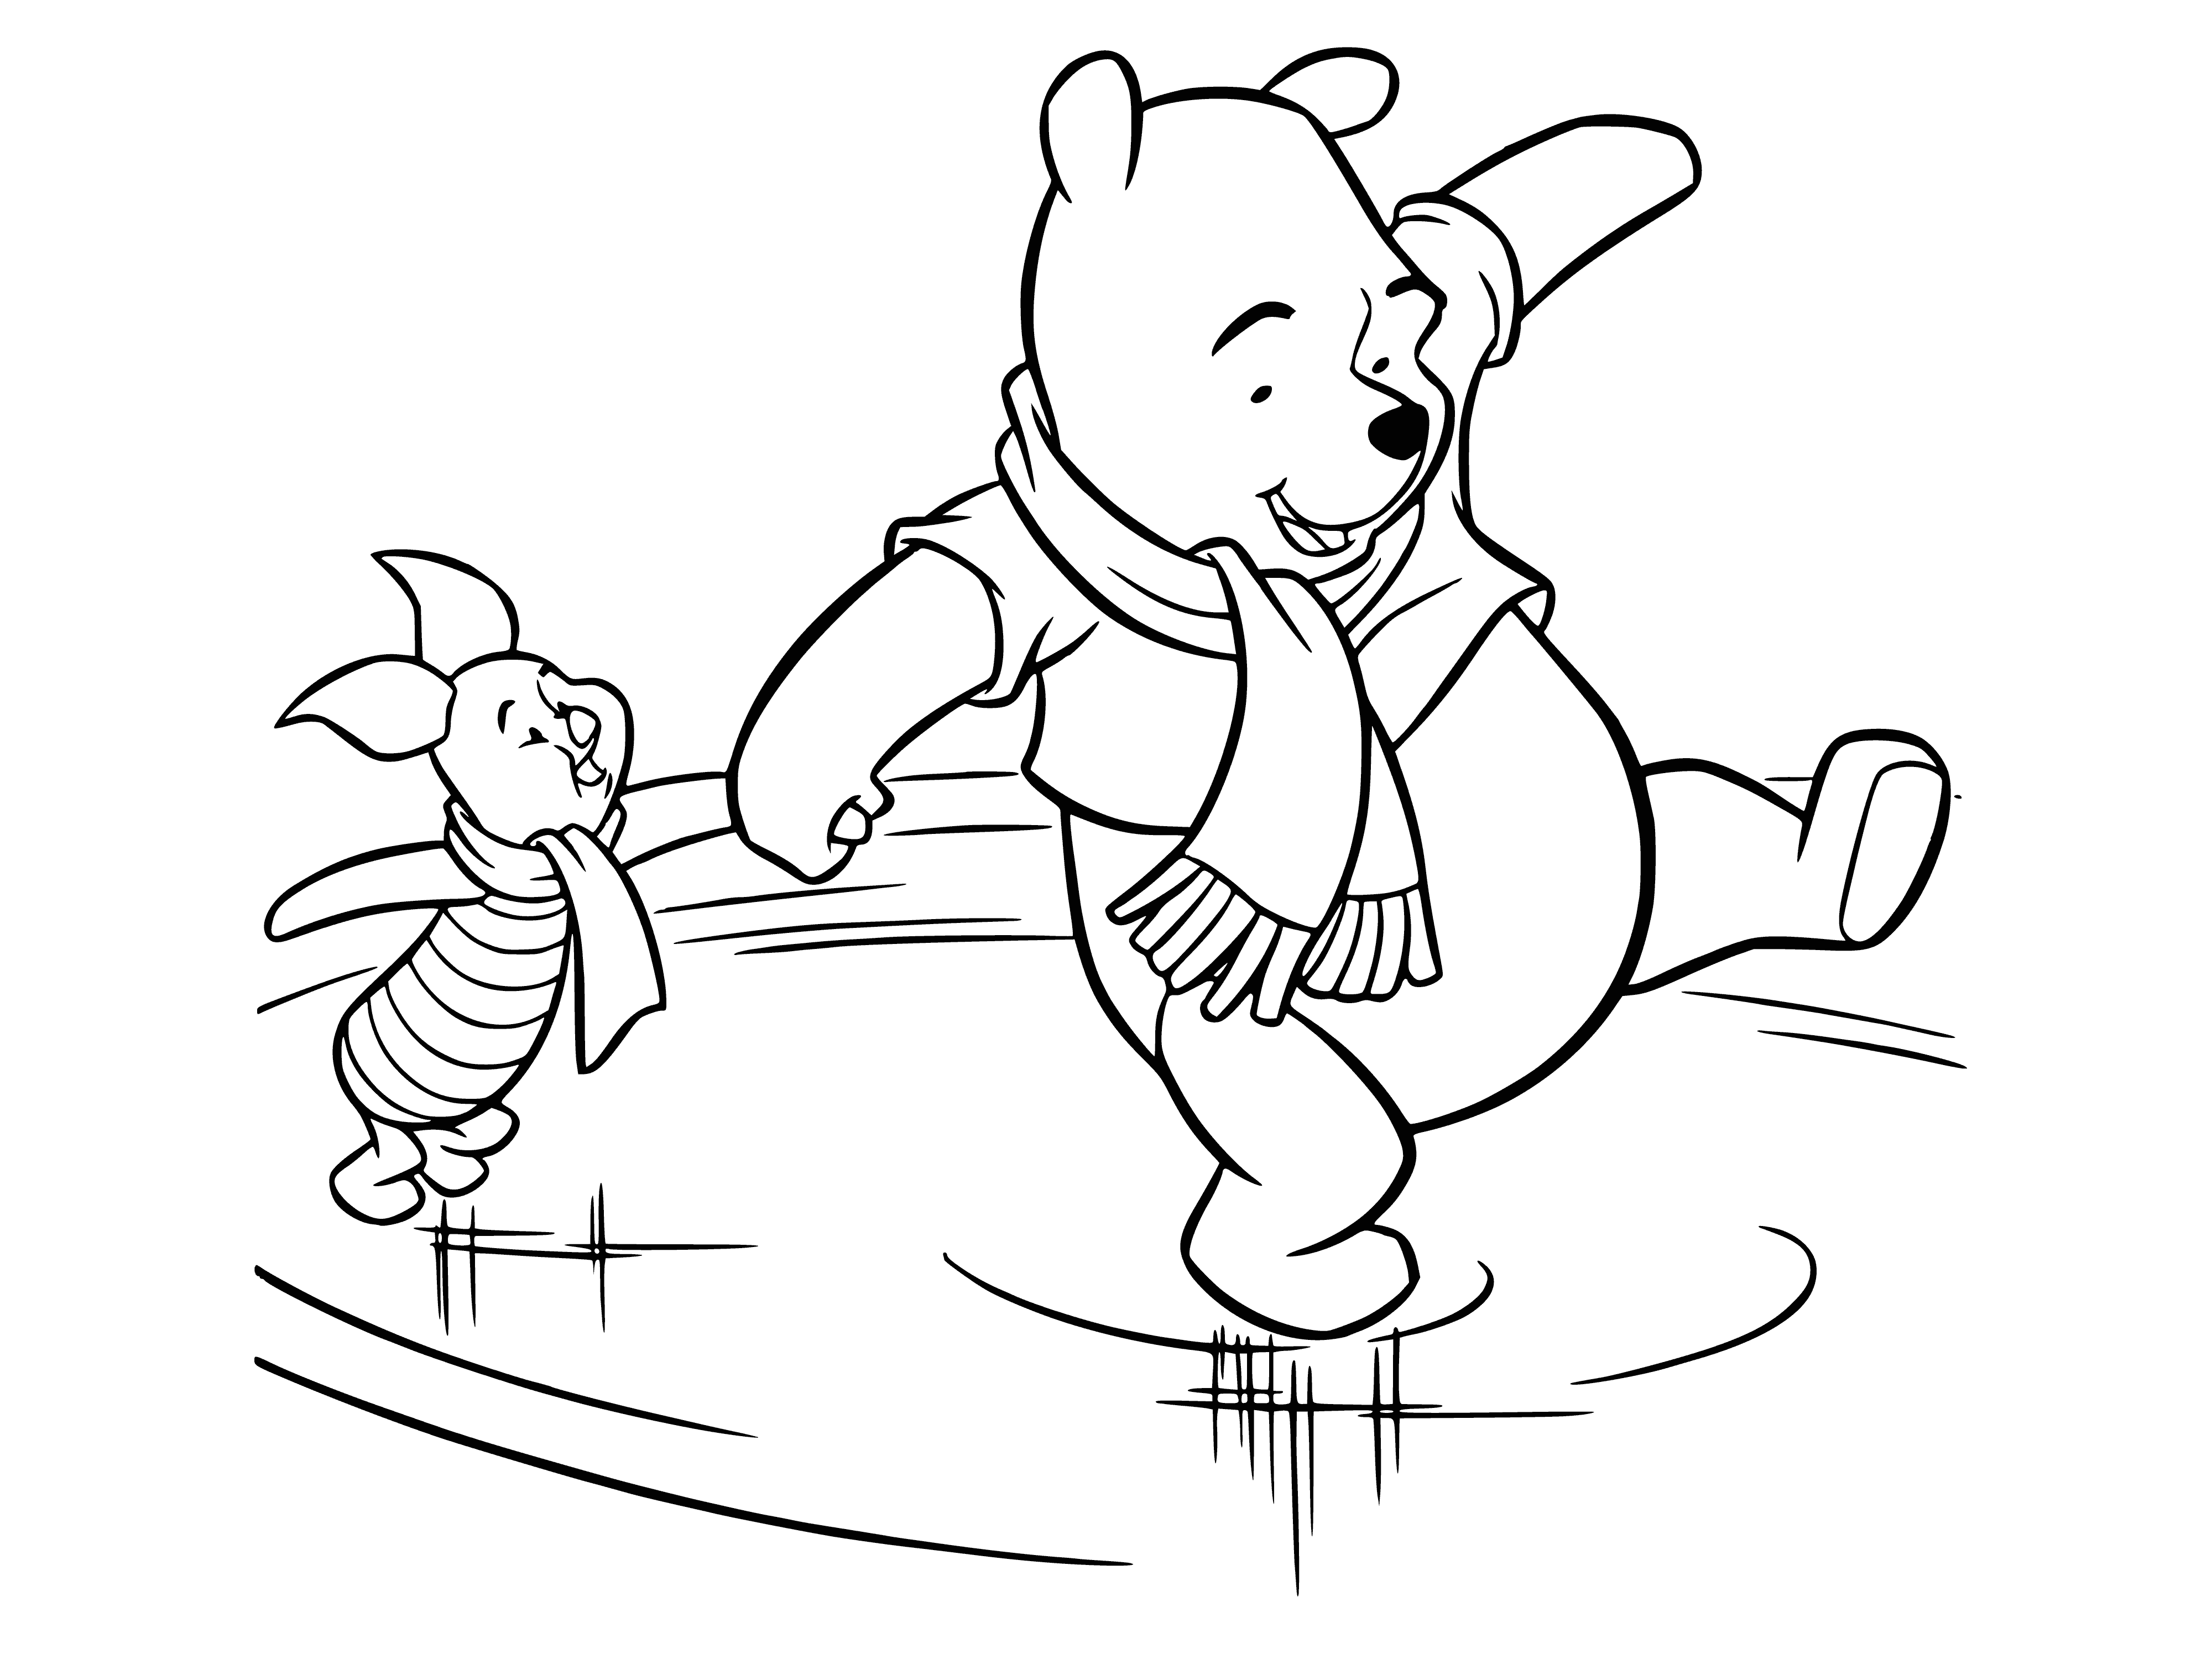 coloring page: Winnie the Pooh & Piggy have a good time gliding on the ice while wearing winter clothes in this fun, printable coloring page.